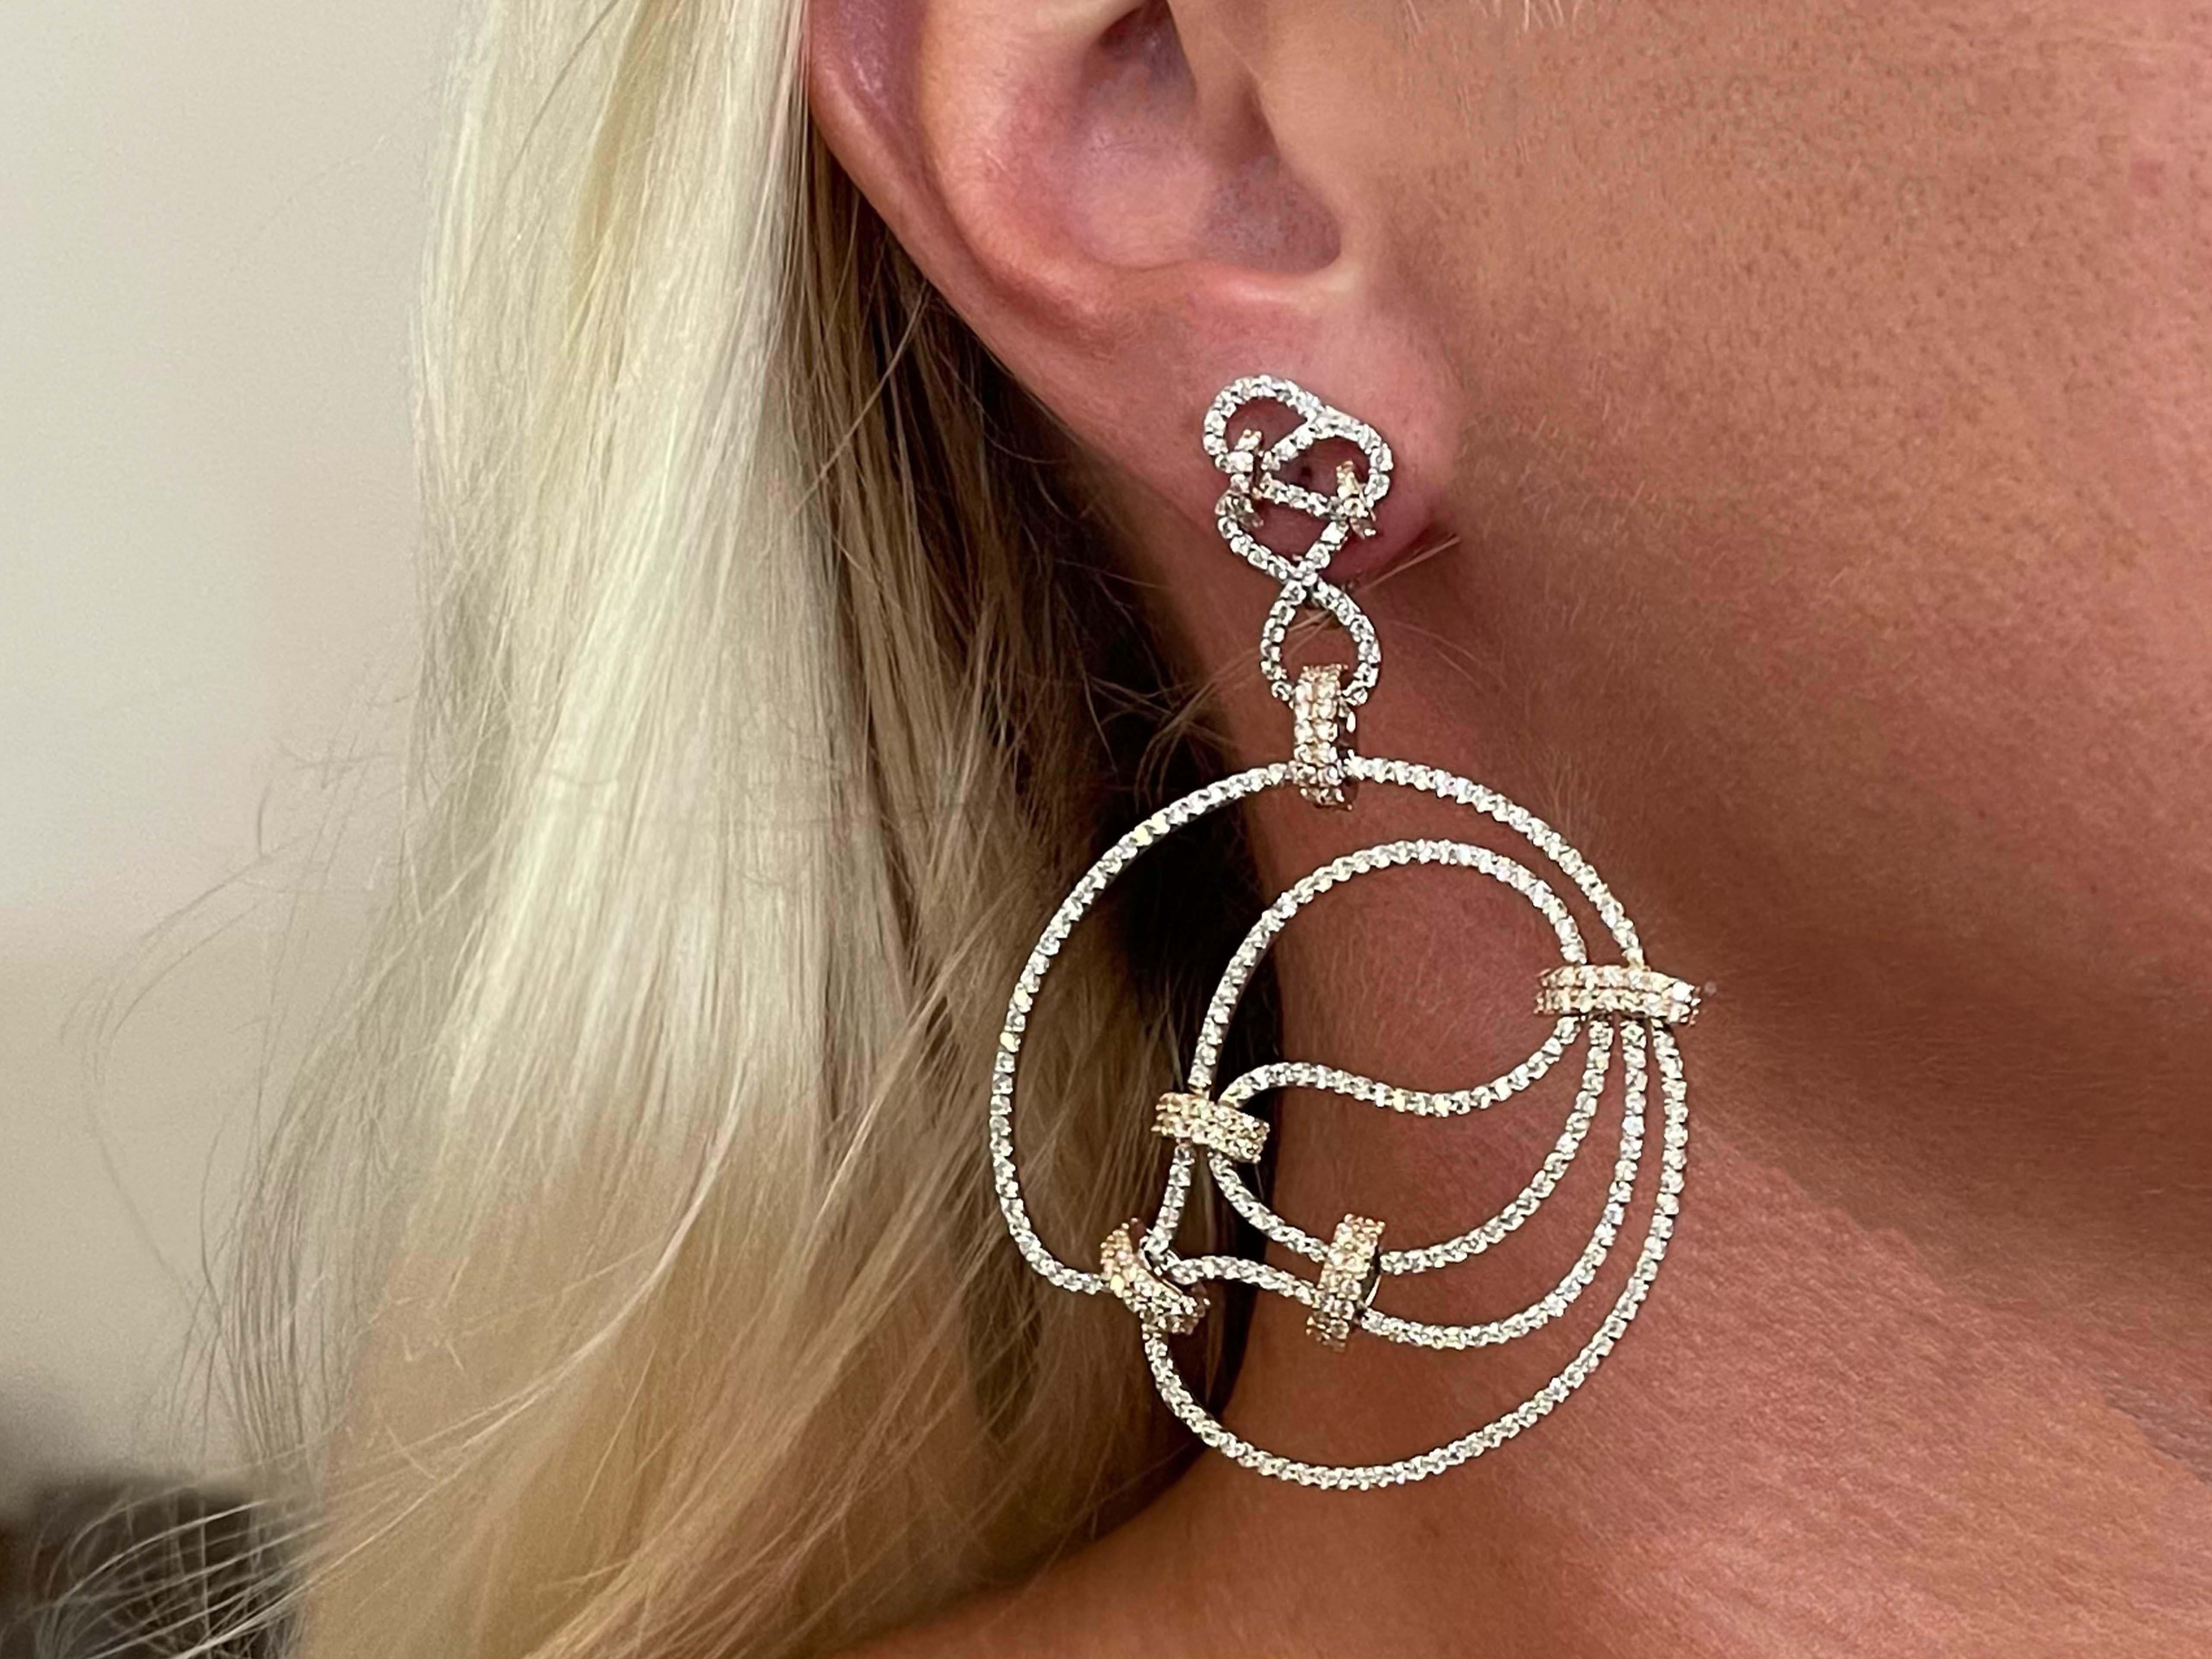 Earrings Specifications:

Metal: 18k White and Rose Gold

Total Weight: 30.6 Grams

Diamonds: 674 White Round Brilliant Cut Diamonds 

Color: G

Clarity: VS

Total Diamond Carat Weight: ~ 6.74 carats 
​
​Stamped: 